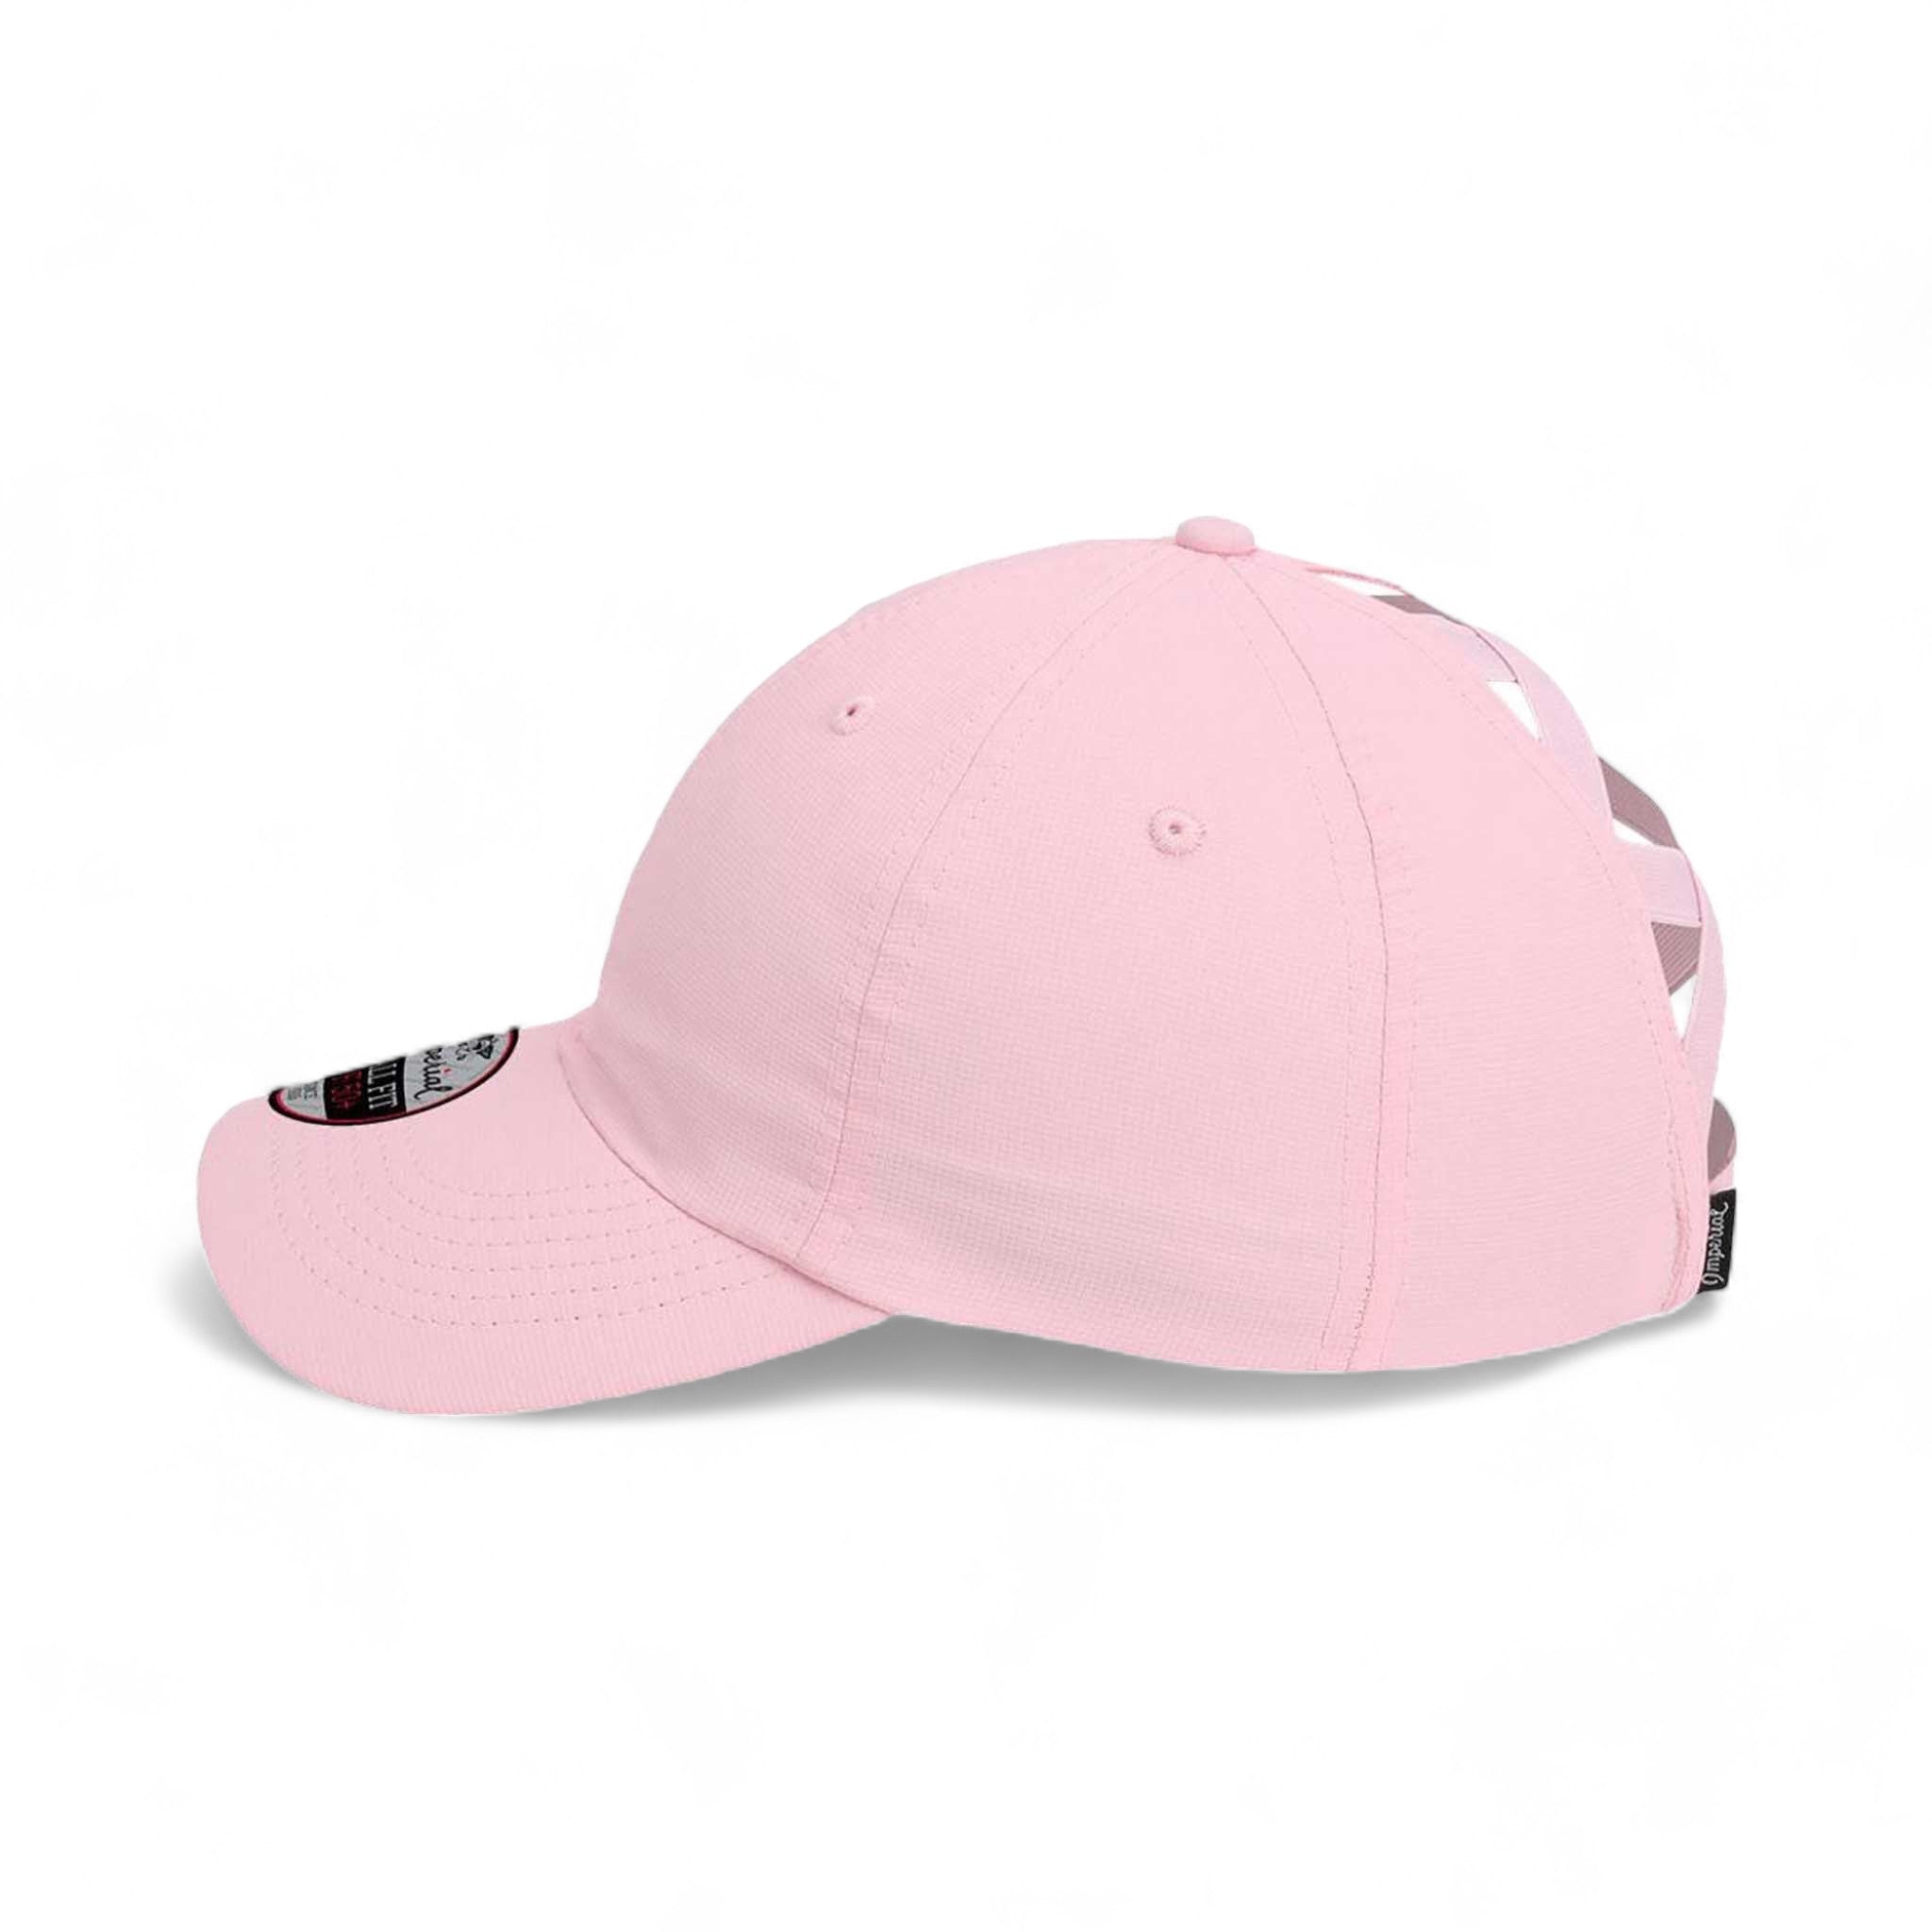 Side view of Imperial L338 custom hat in light pink